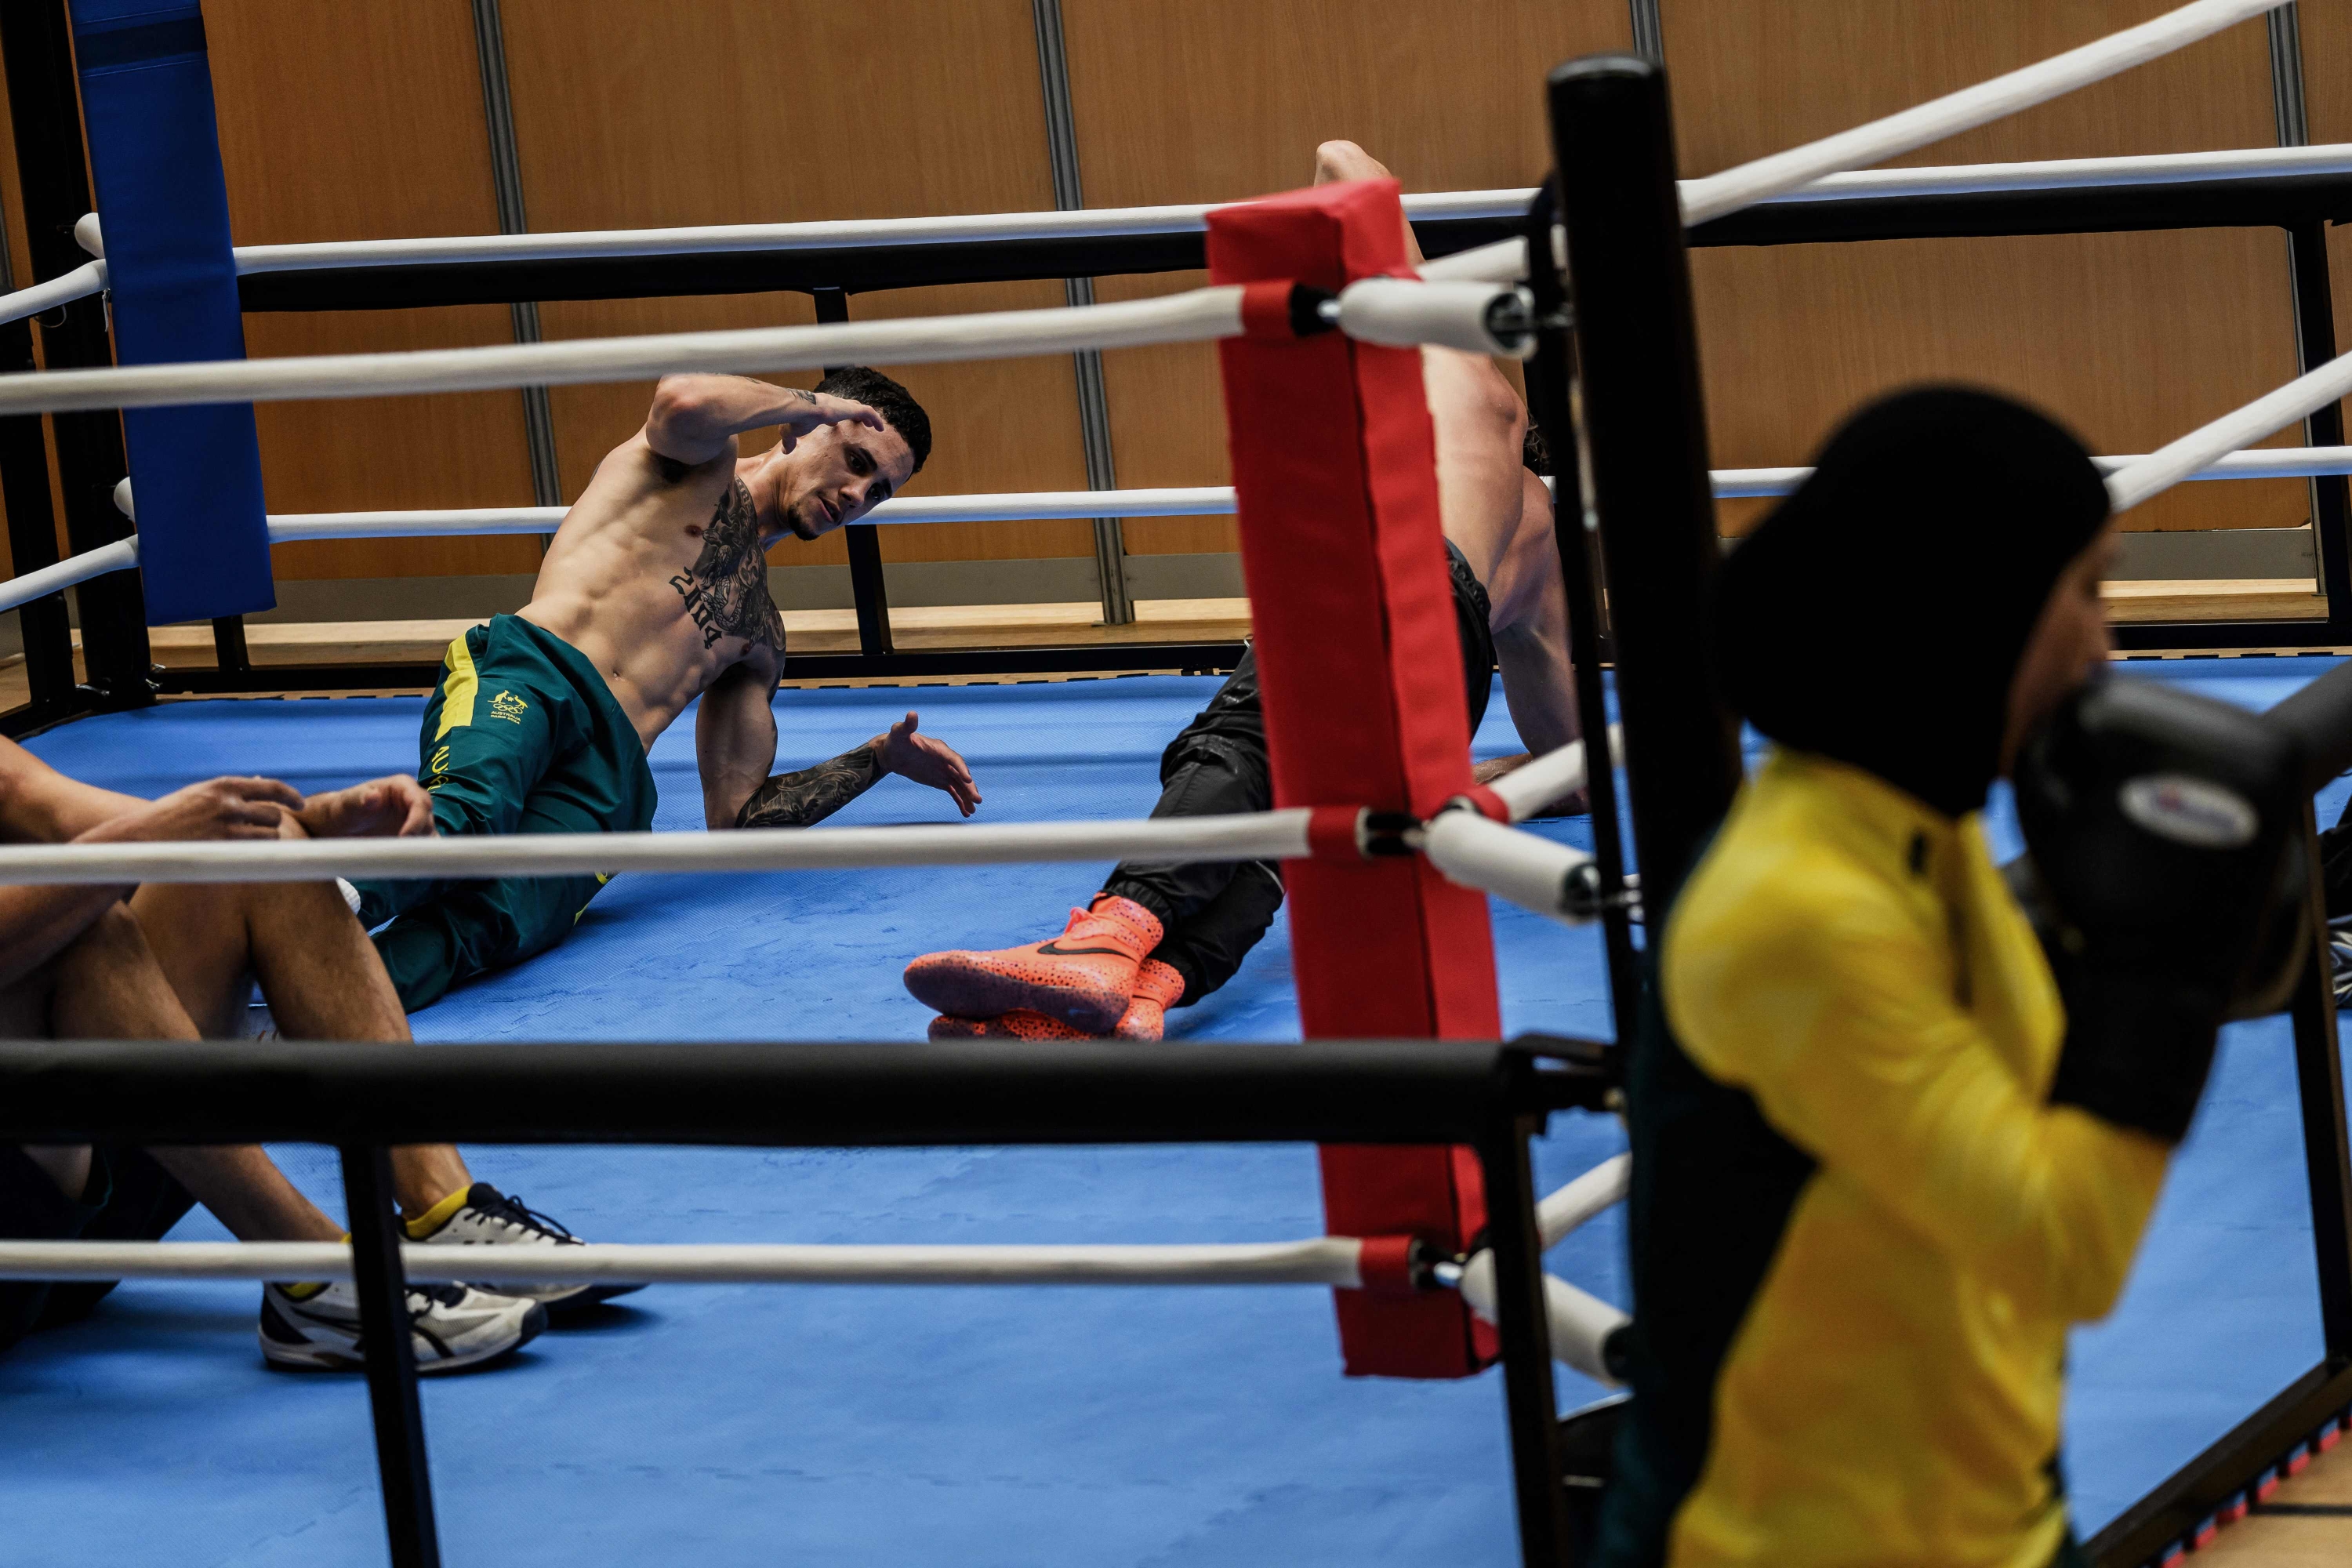 Australian boxer Charlie Senior stretches after taking part in the Australia boxing team training session in Paris, on July 24, 2024, ahead of the Paris 2024 Olympic Games. (Photo by JEFF PACHOUD / AFP)